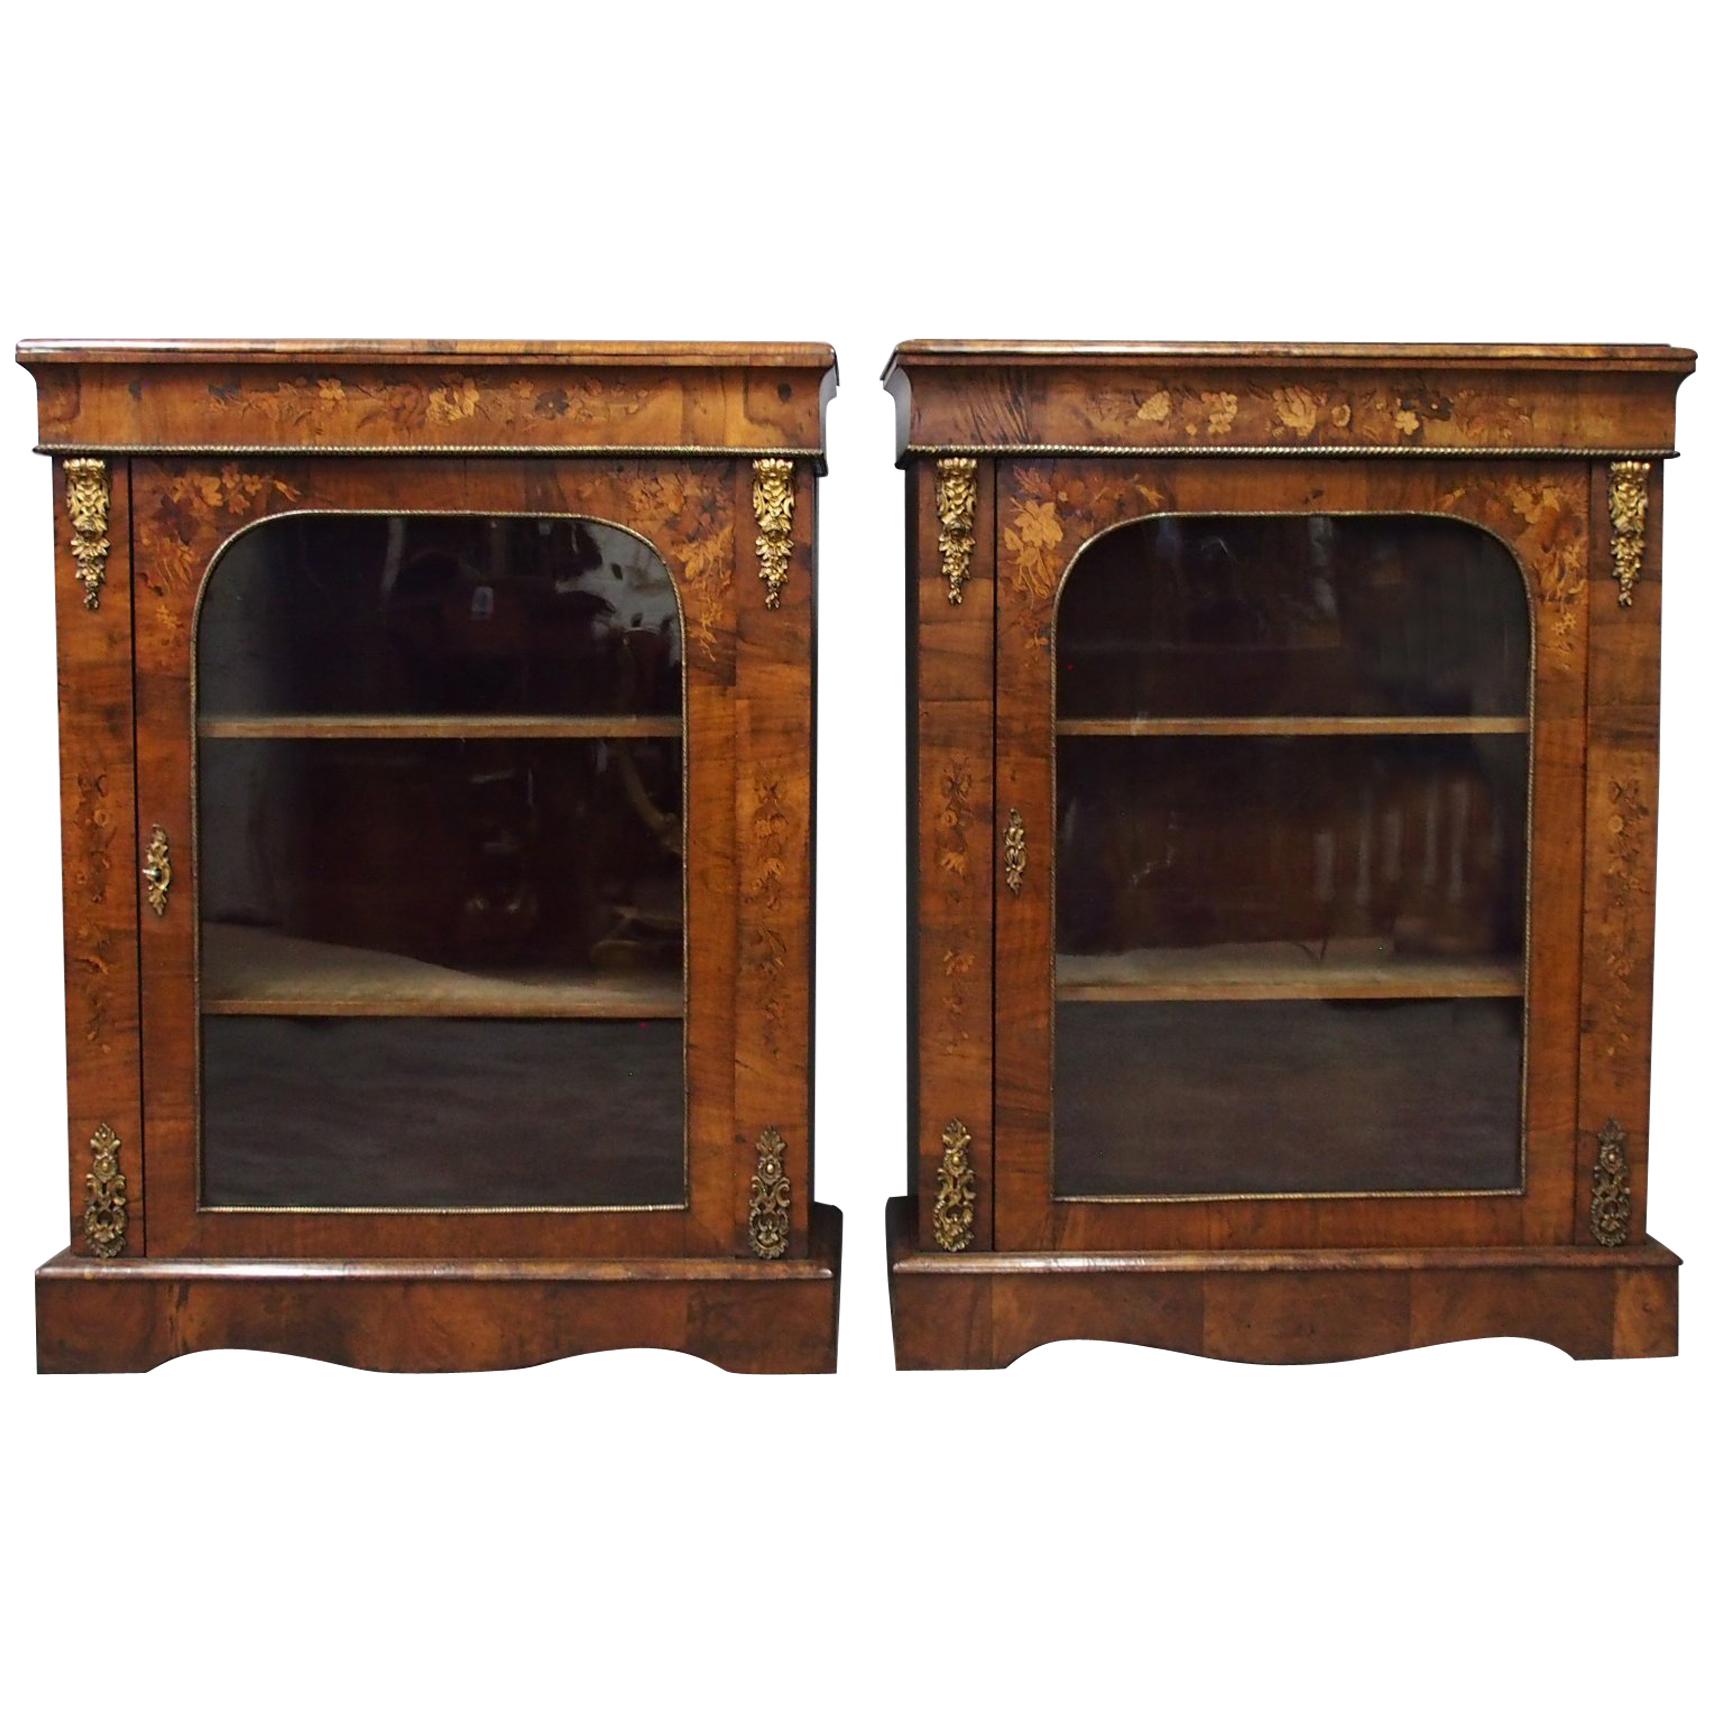 Pair of 19th Century Marquetry Inlaid Walnut Pier Cabinets For Sale